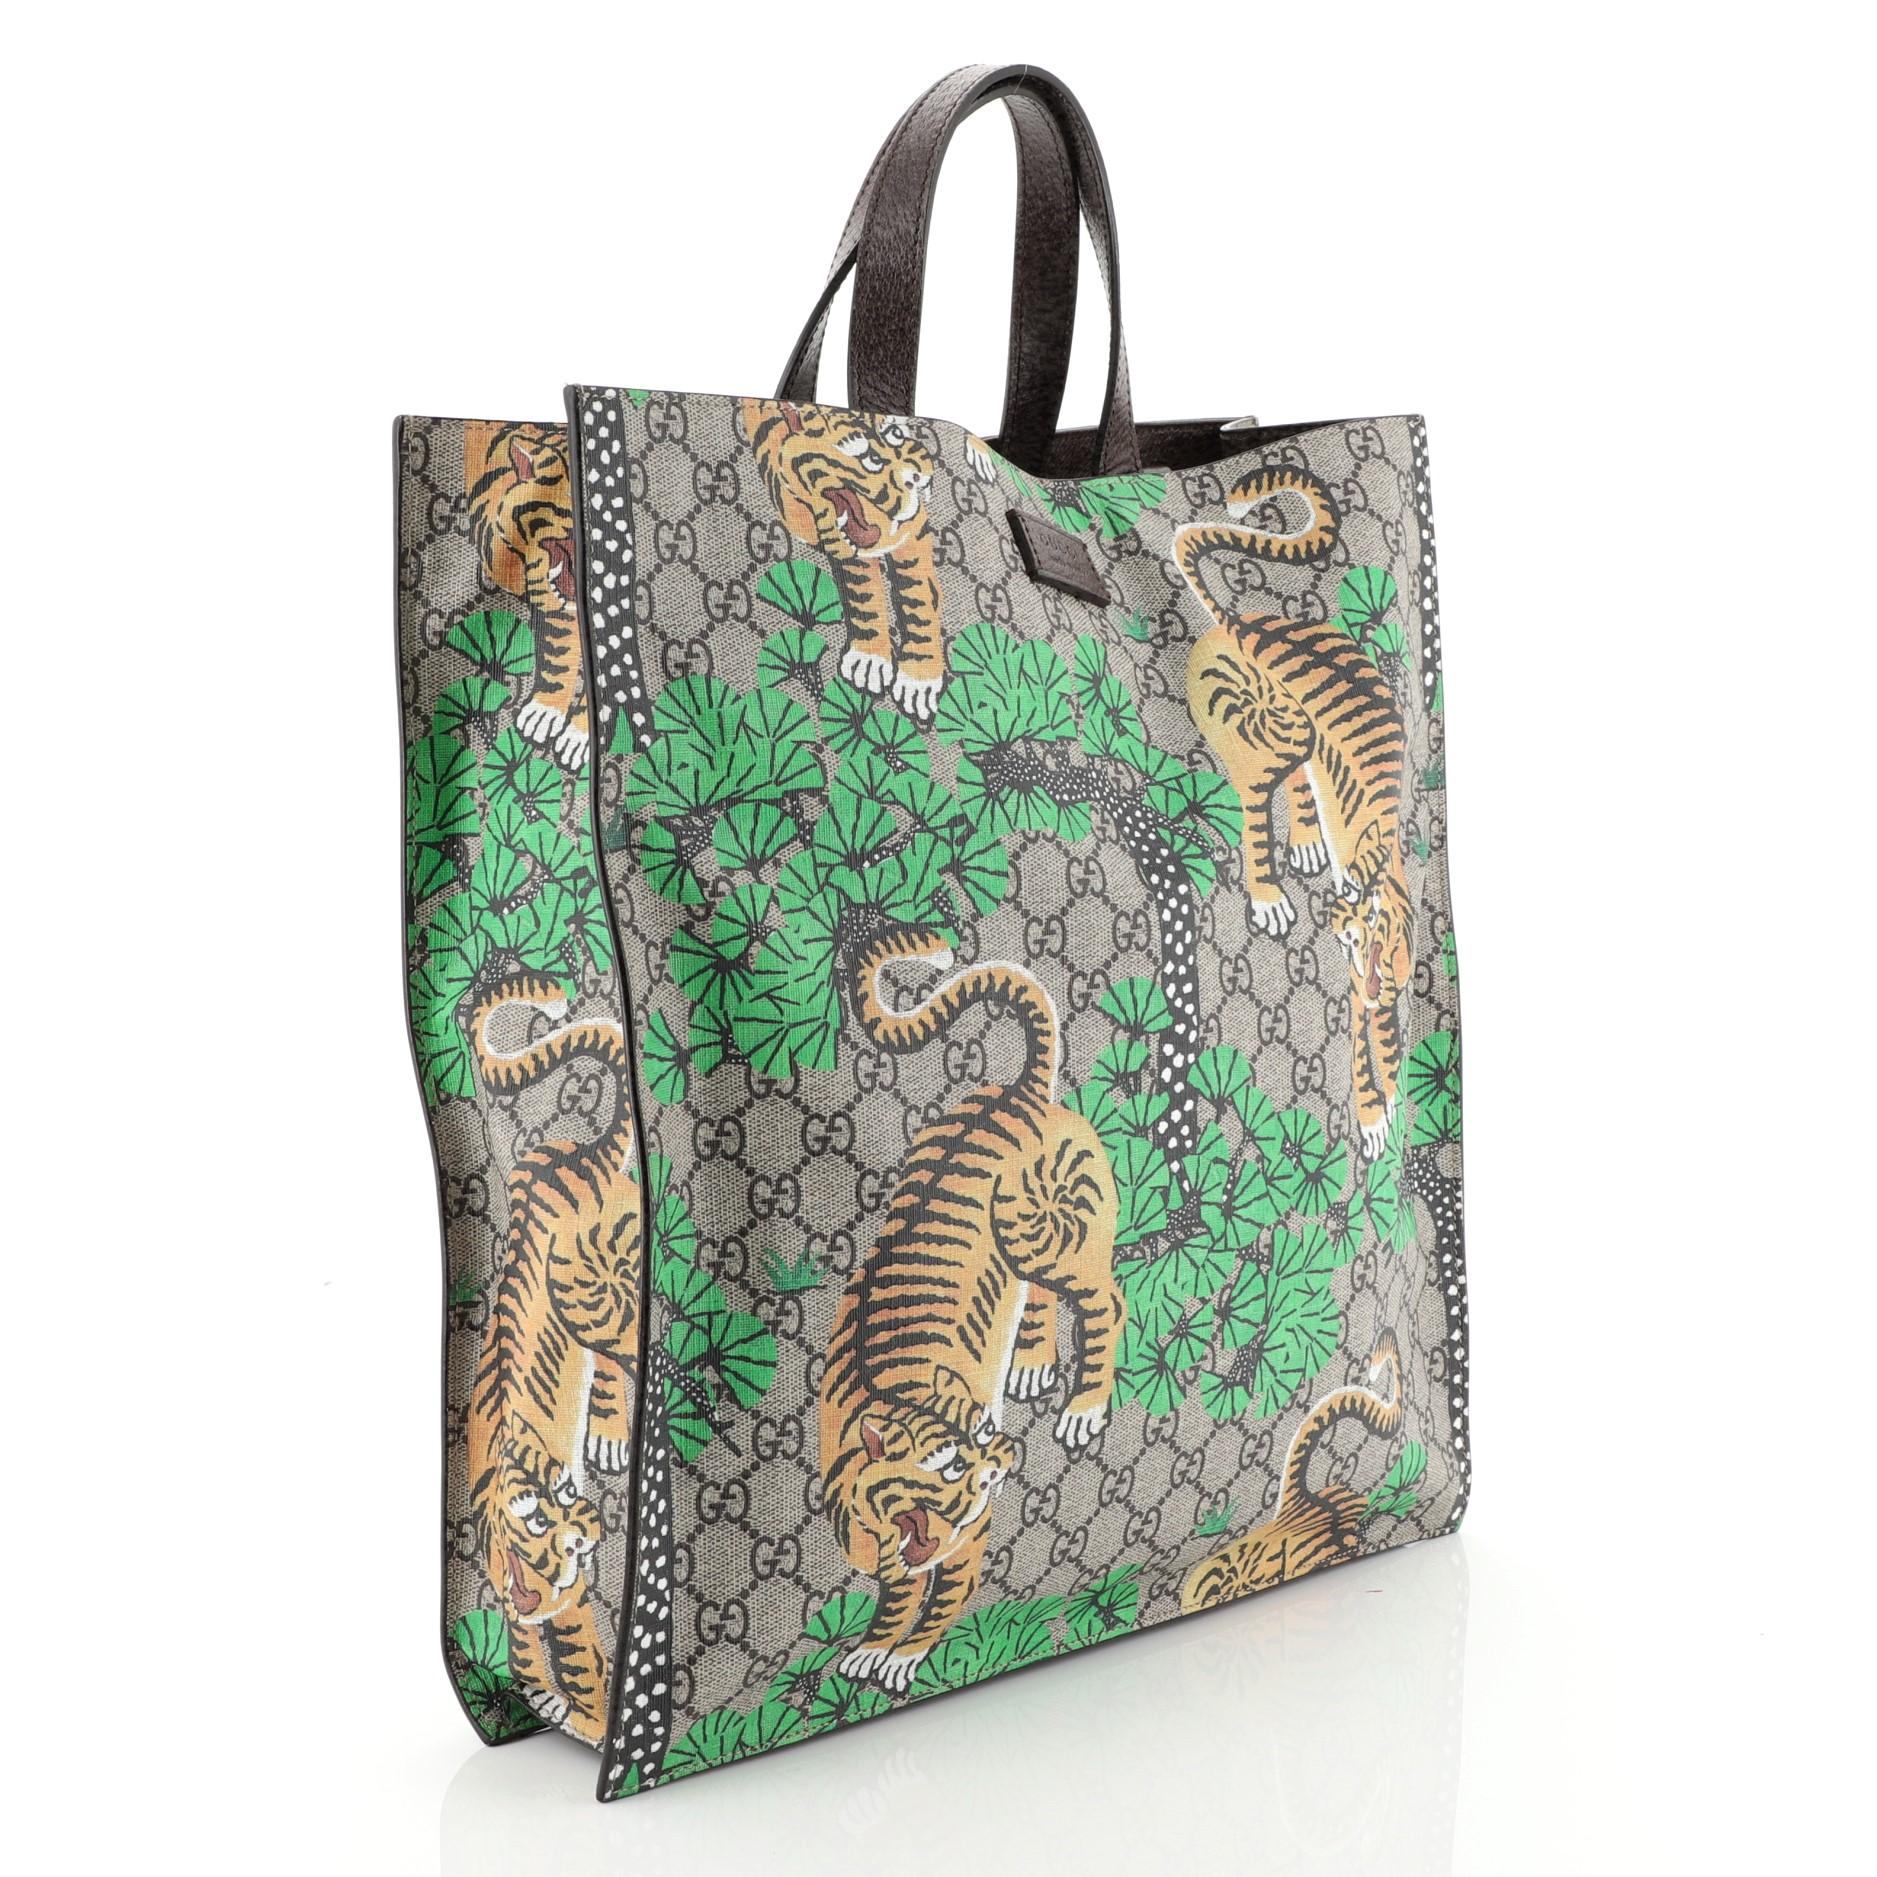 This Gucci Convertible Soft Open Tote Bengal Print GG Coated Canvas Tall, crafted in brown GG coated canvas with Bengal print overlay, features dual leather handles and aged gold-tone hardware. Its magnetic closure opens to a brown microfiber